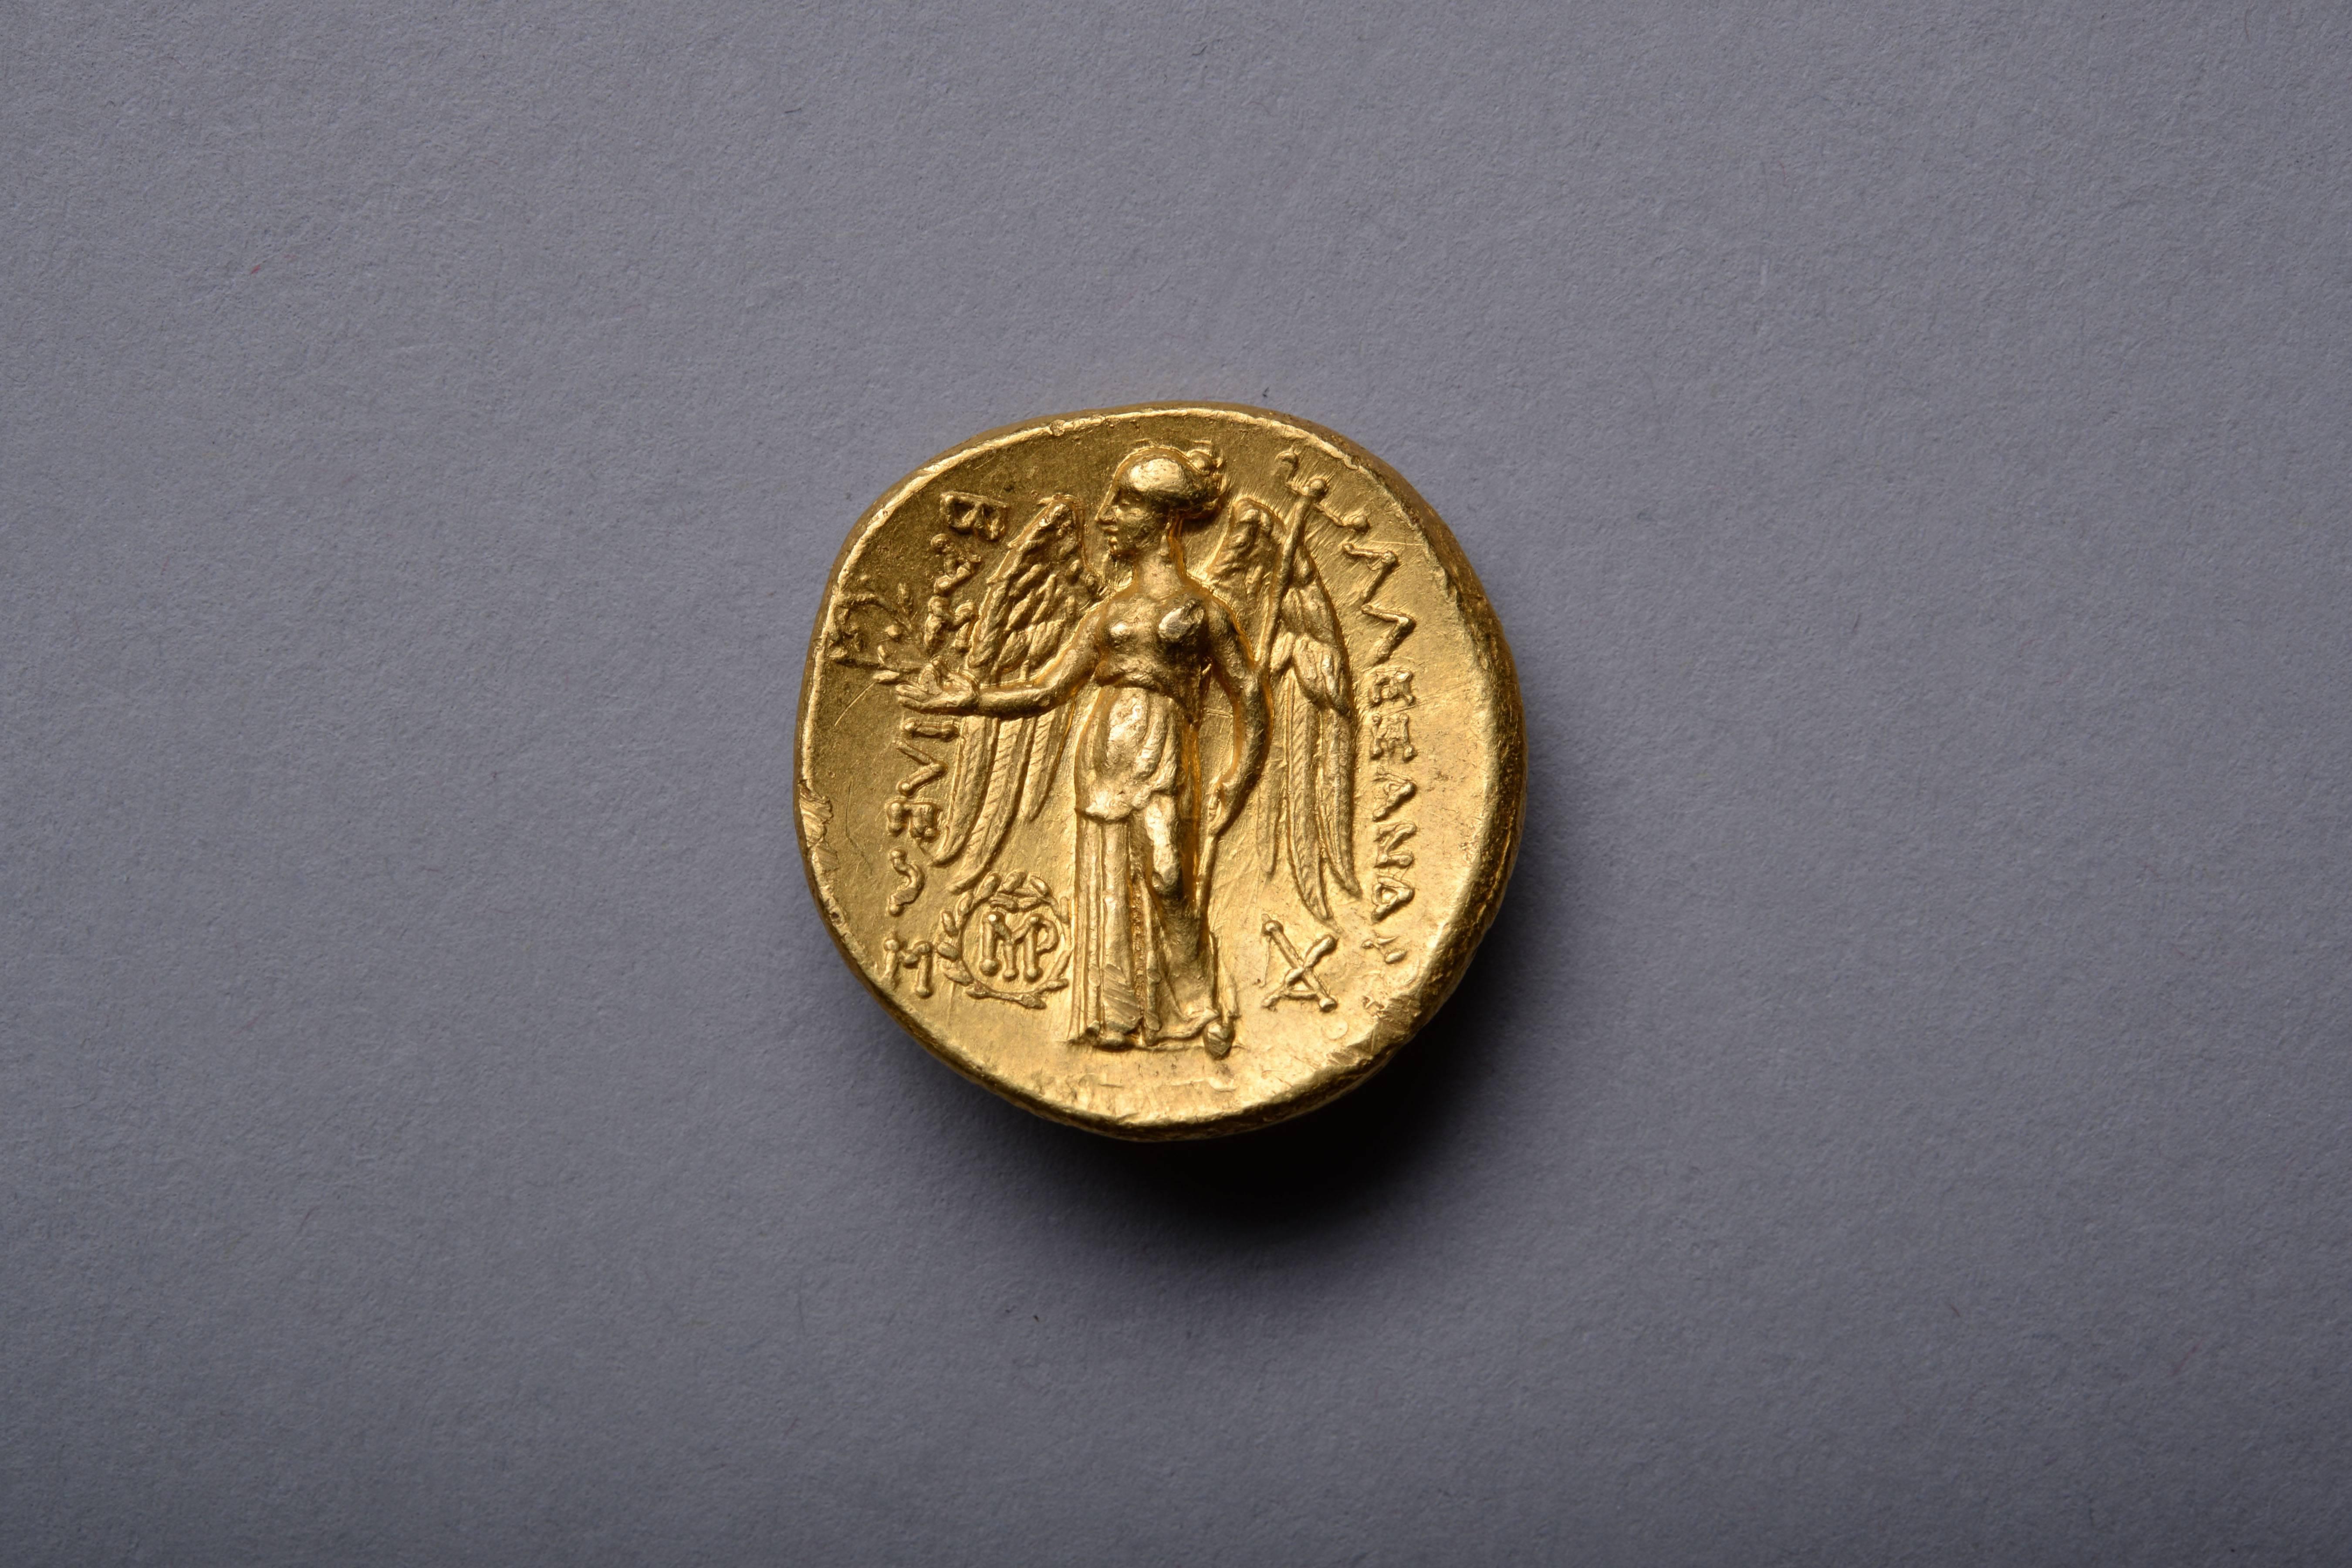 A gorgeous example of one of the most desirable ancient Greek coin types, with an exceptional pedigree.

A solid gold ancient Greek stater minted in the name of the greatest military leader of antiquity, King Alexander the Great of Macedon. This